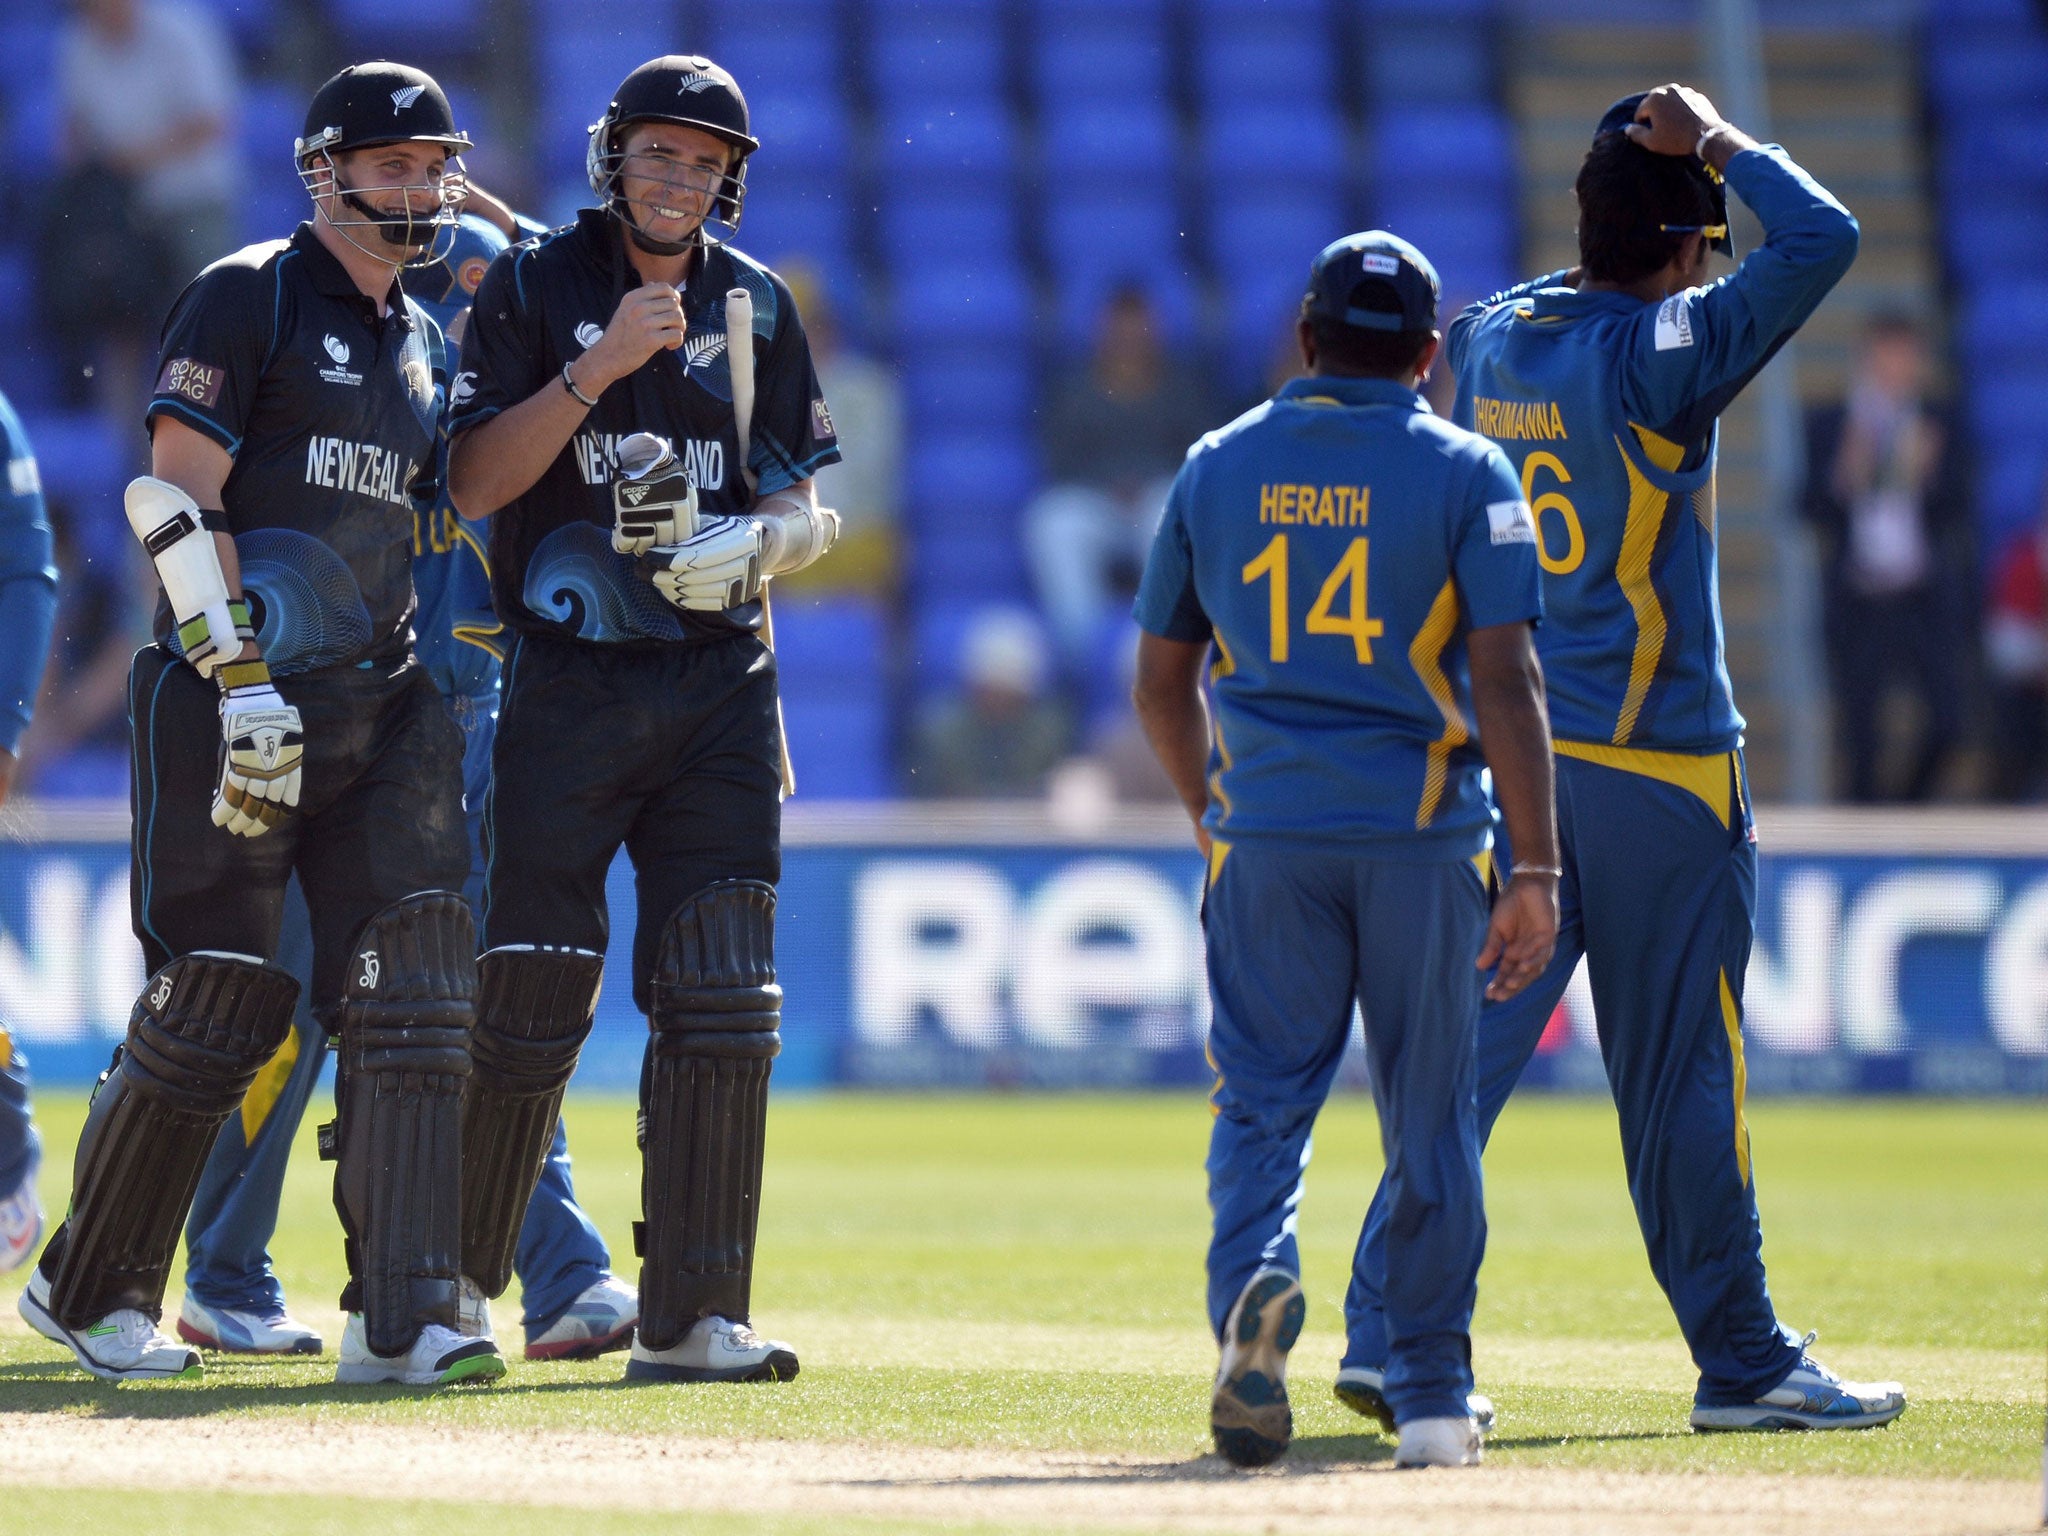 New Zealand’s Mitchell McClenaghan, left, and teammate Tim Southee, right, after clinching victory against Sri Lanka